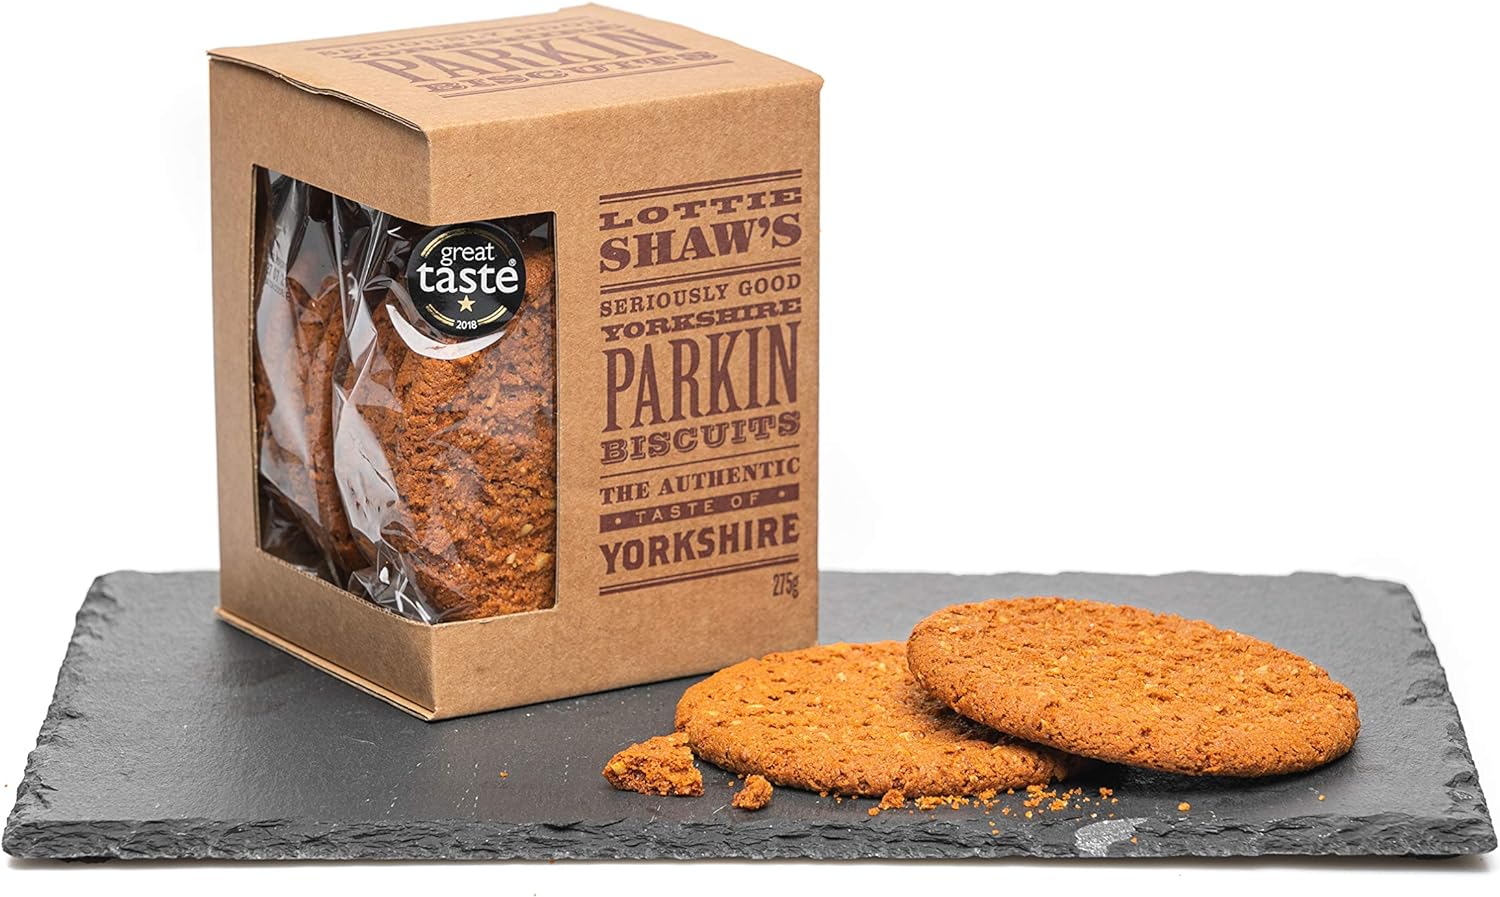 Image name yorkshire parkin biscuits the 23 image from the post Yorkshire Black Friday Deals in Yorkshire.com.